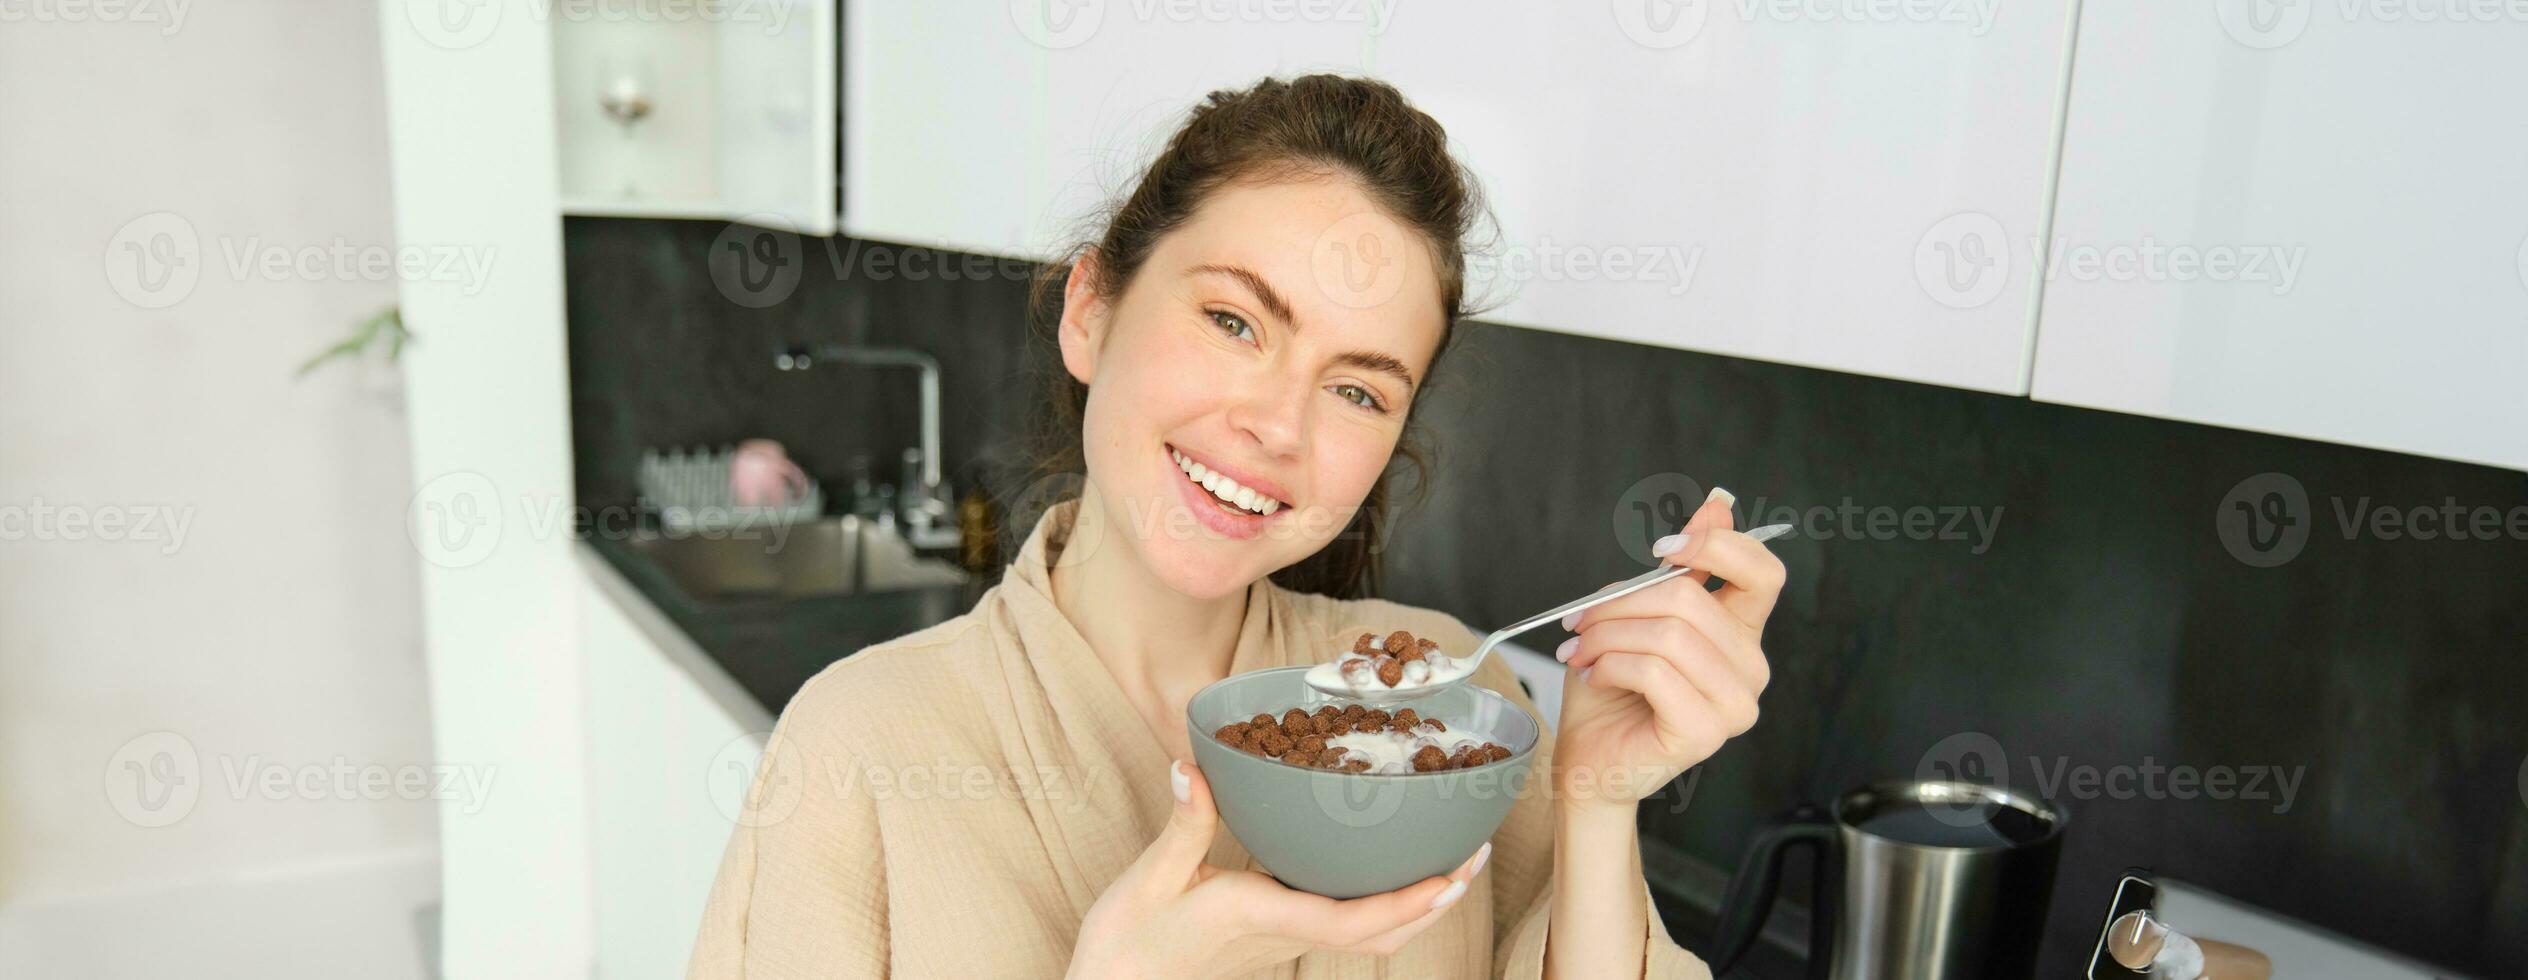 Close up of beautiful smiling woman in bathrobe, standing in kitchen near worktop, eating bowl of chocolate cereals with milk, holding spoon and looking happy at camera photo